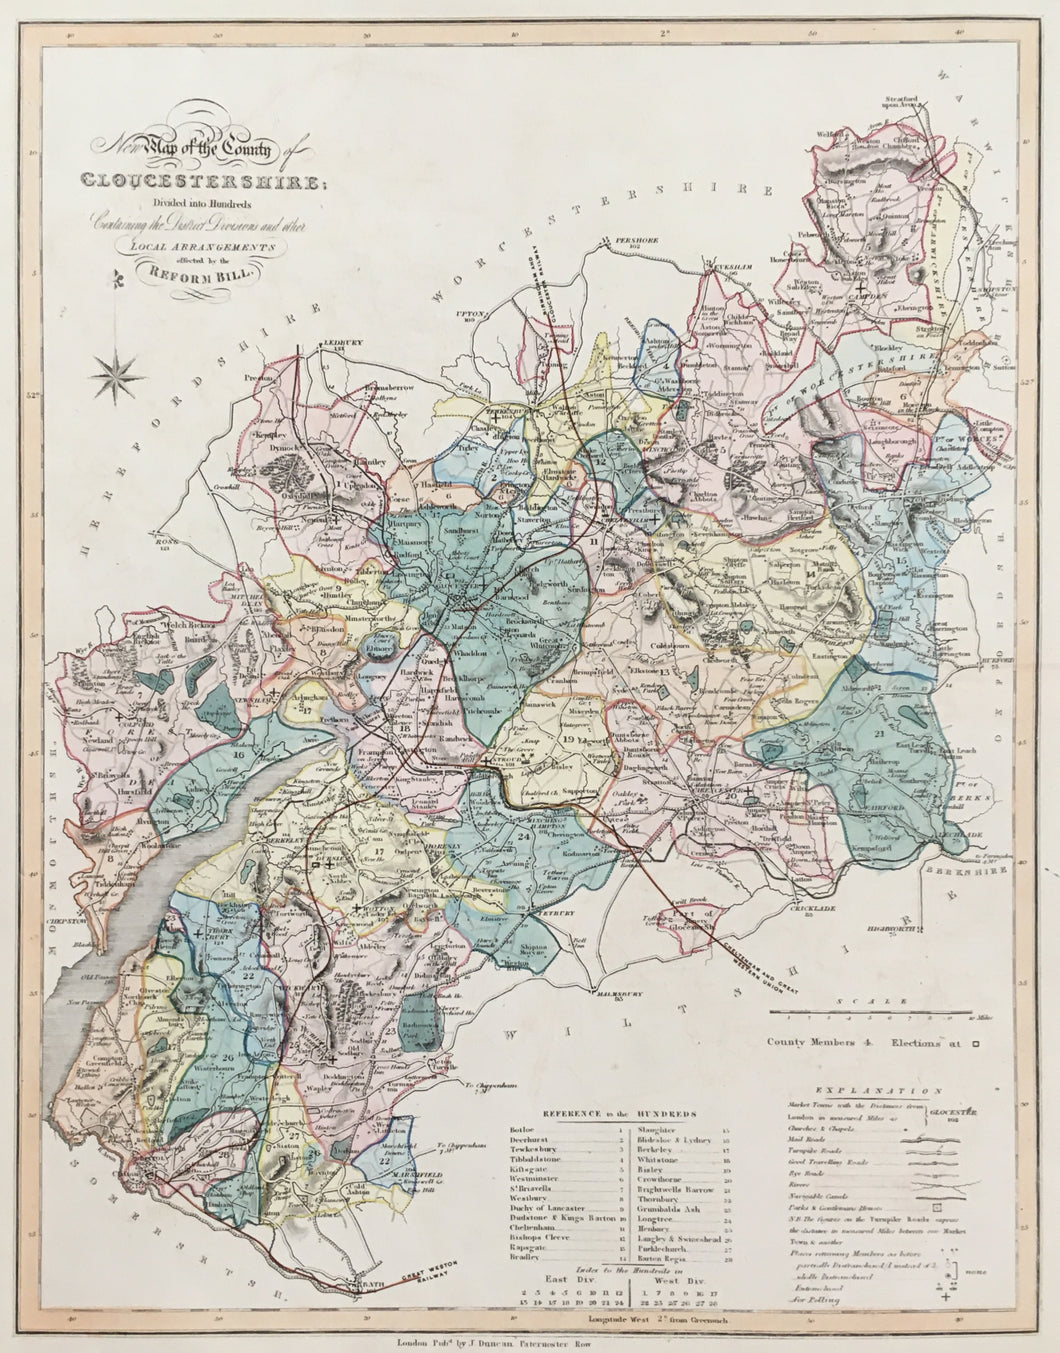 Ebden, William “New Map of the County of Gloucestershire.”